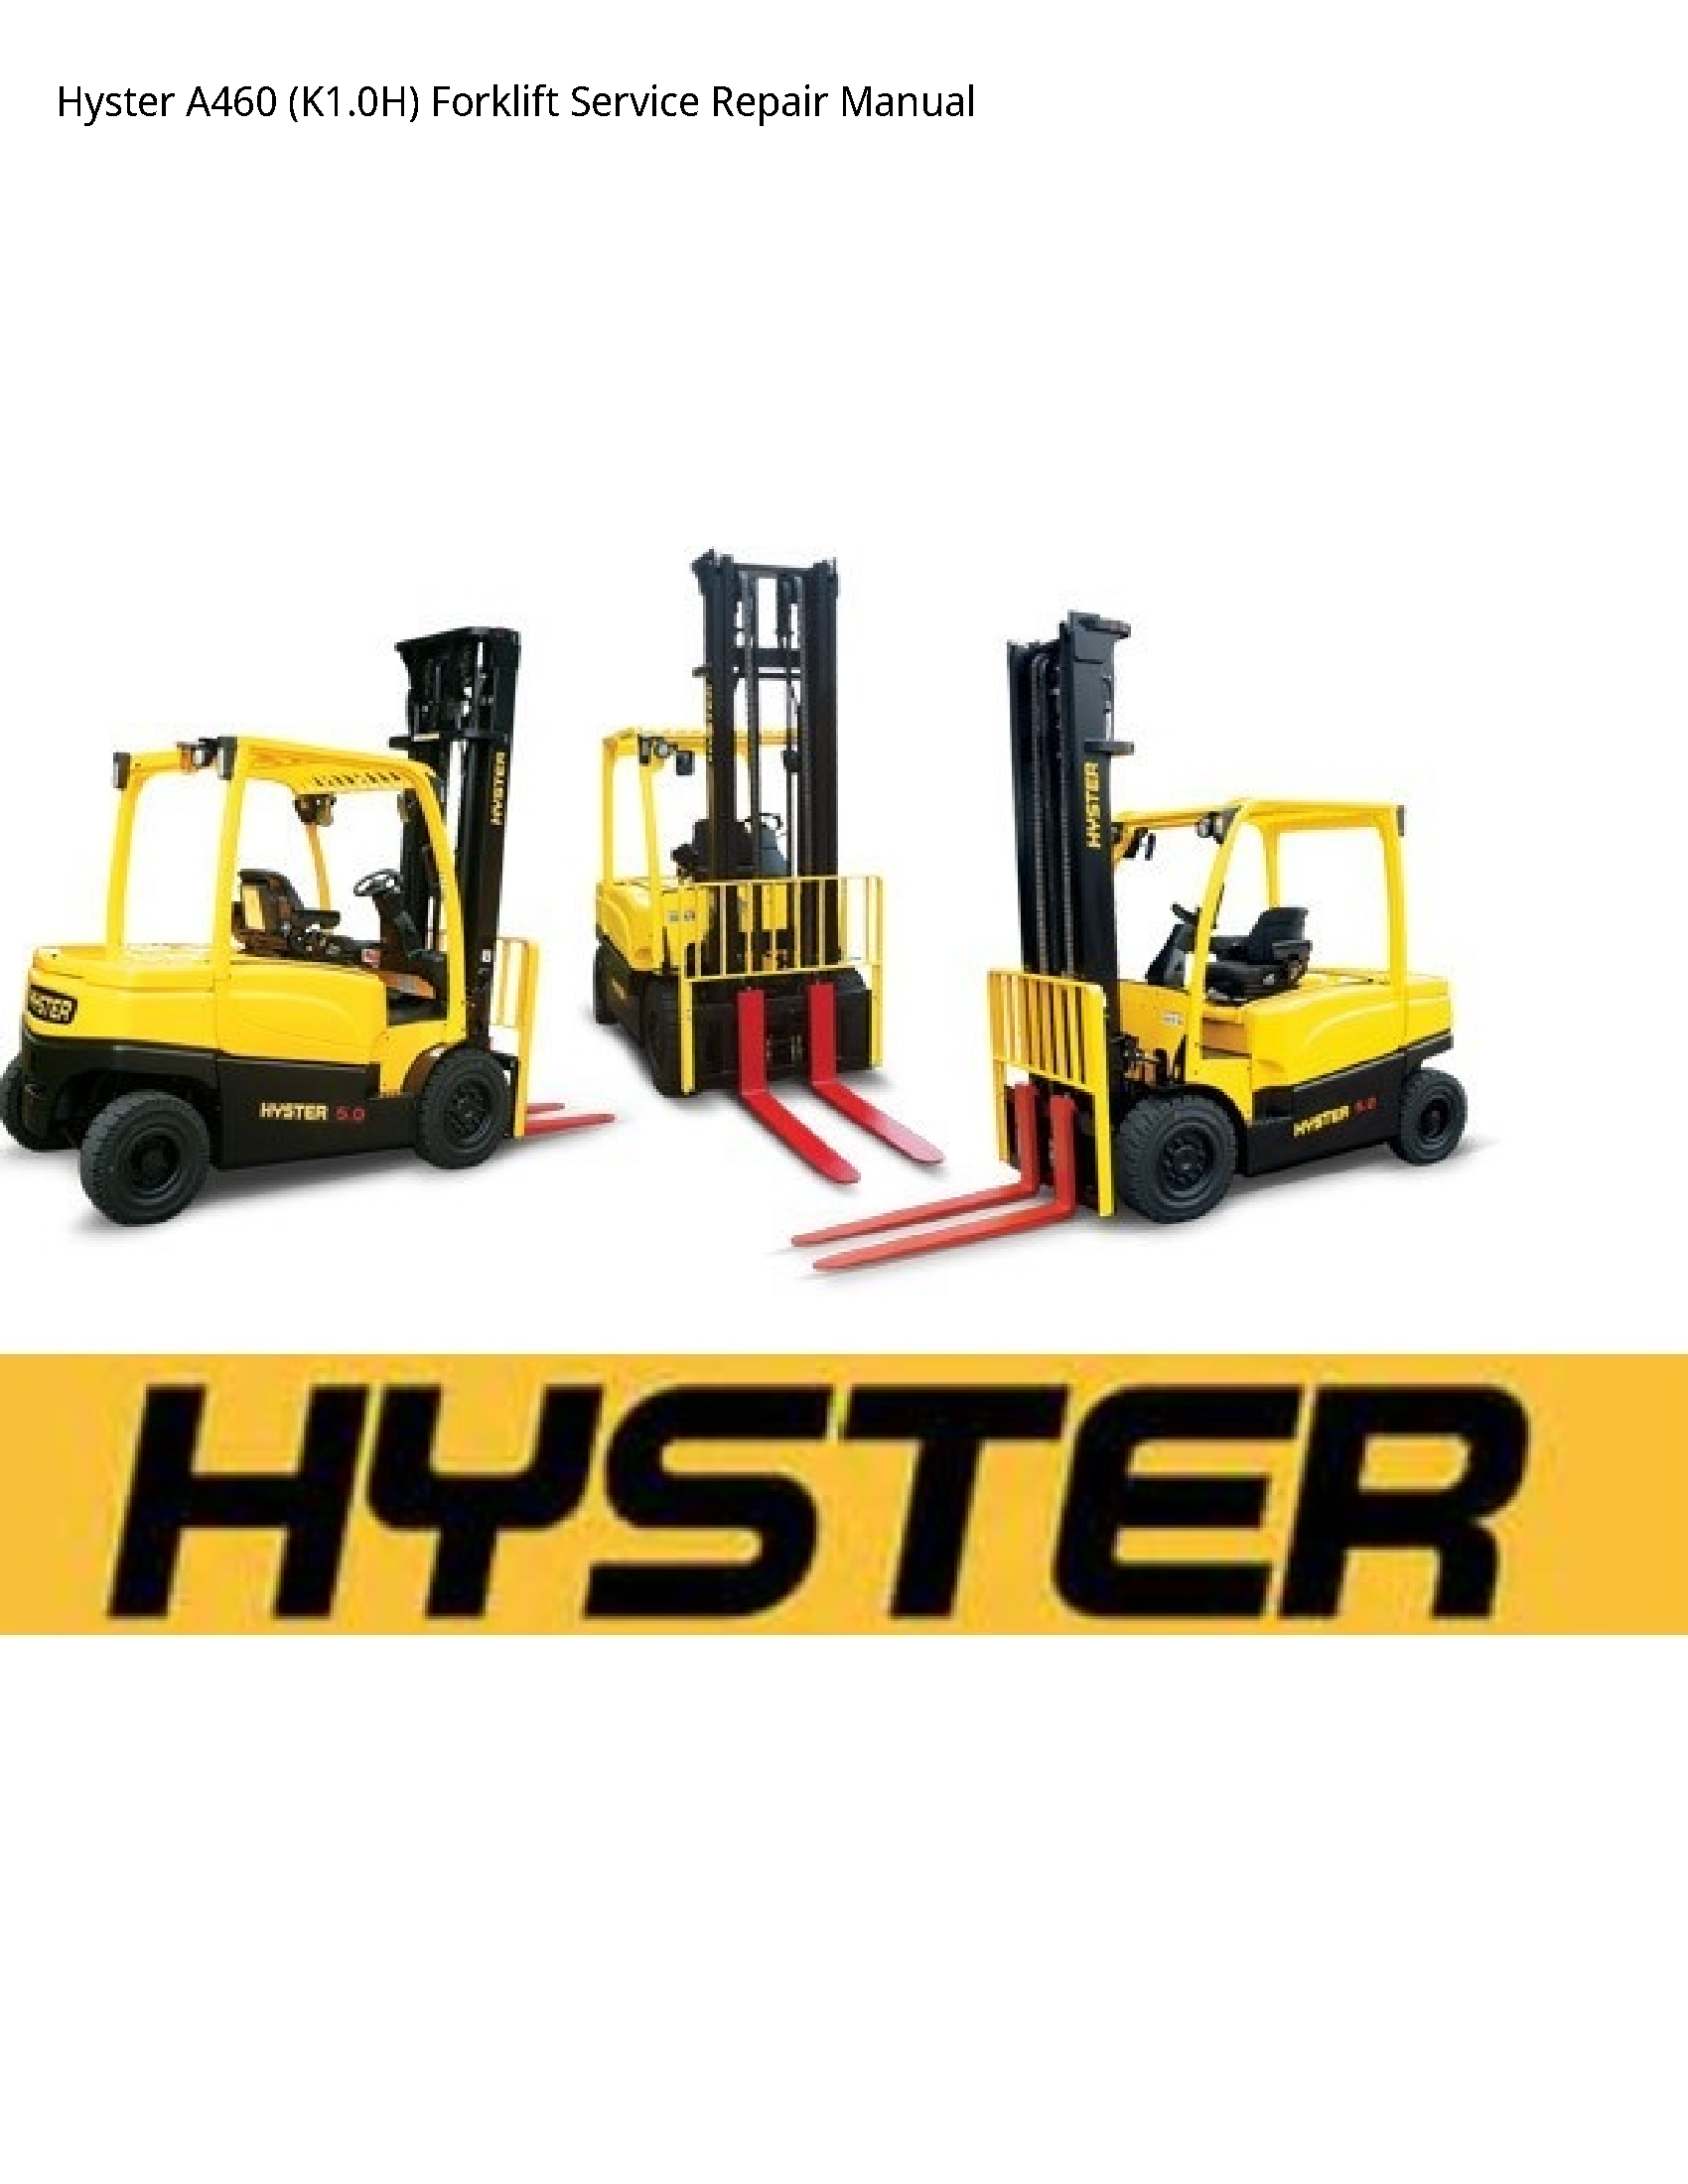 Hyster A460 Forklift manual